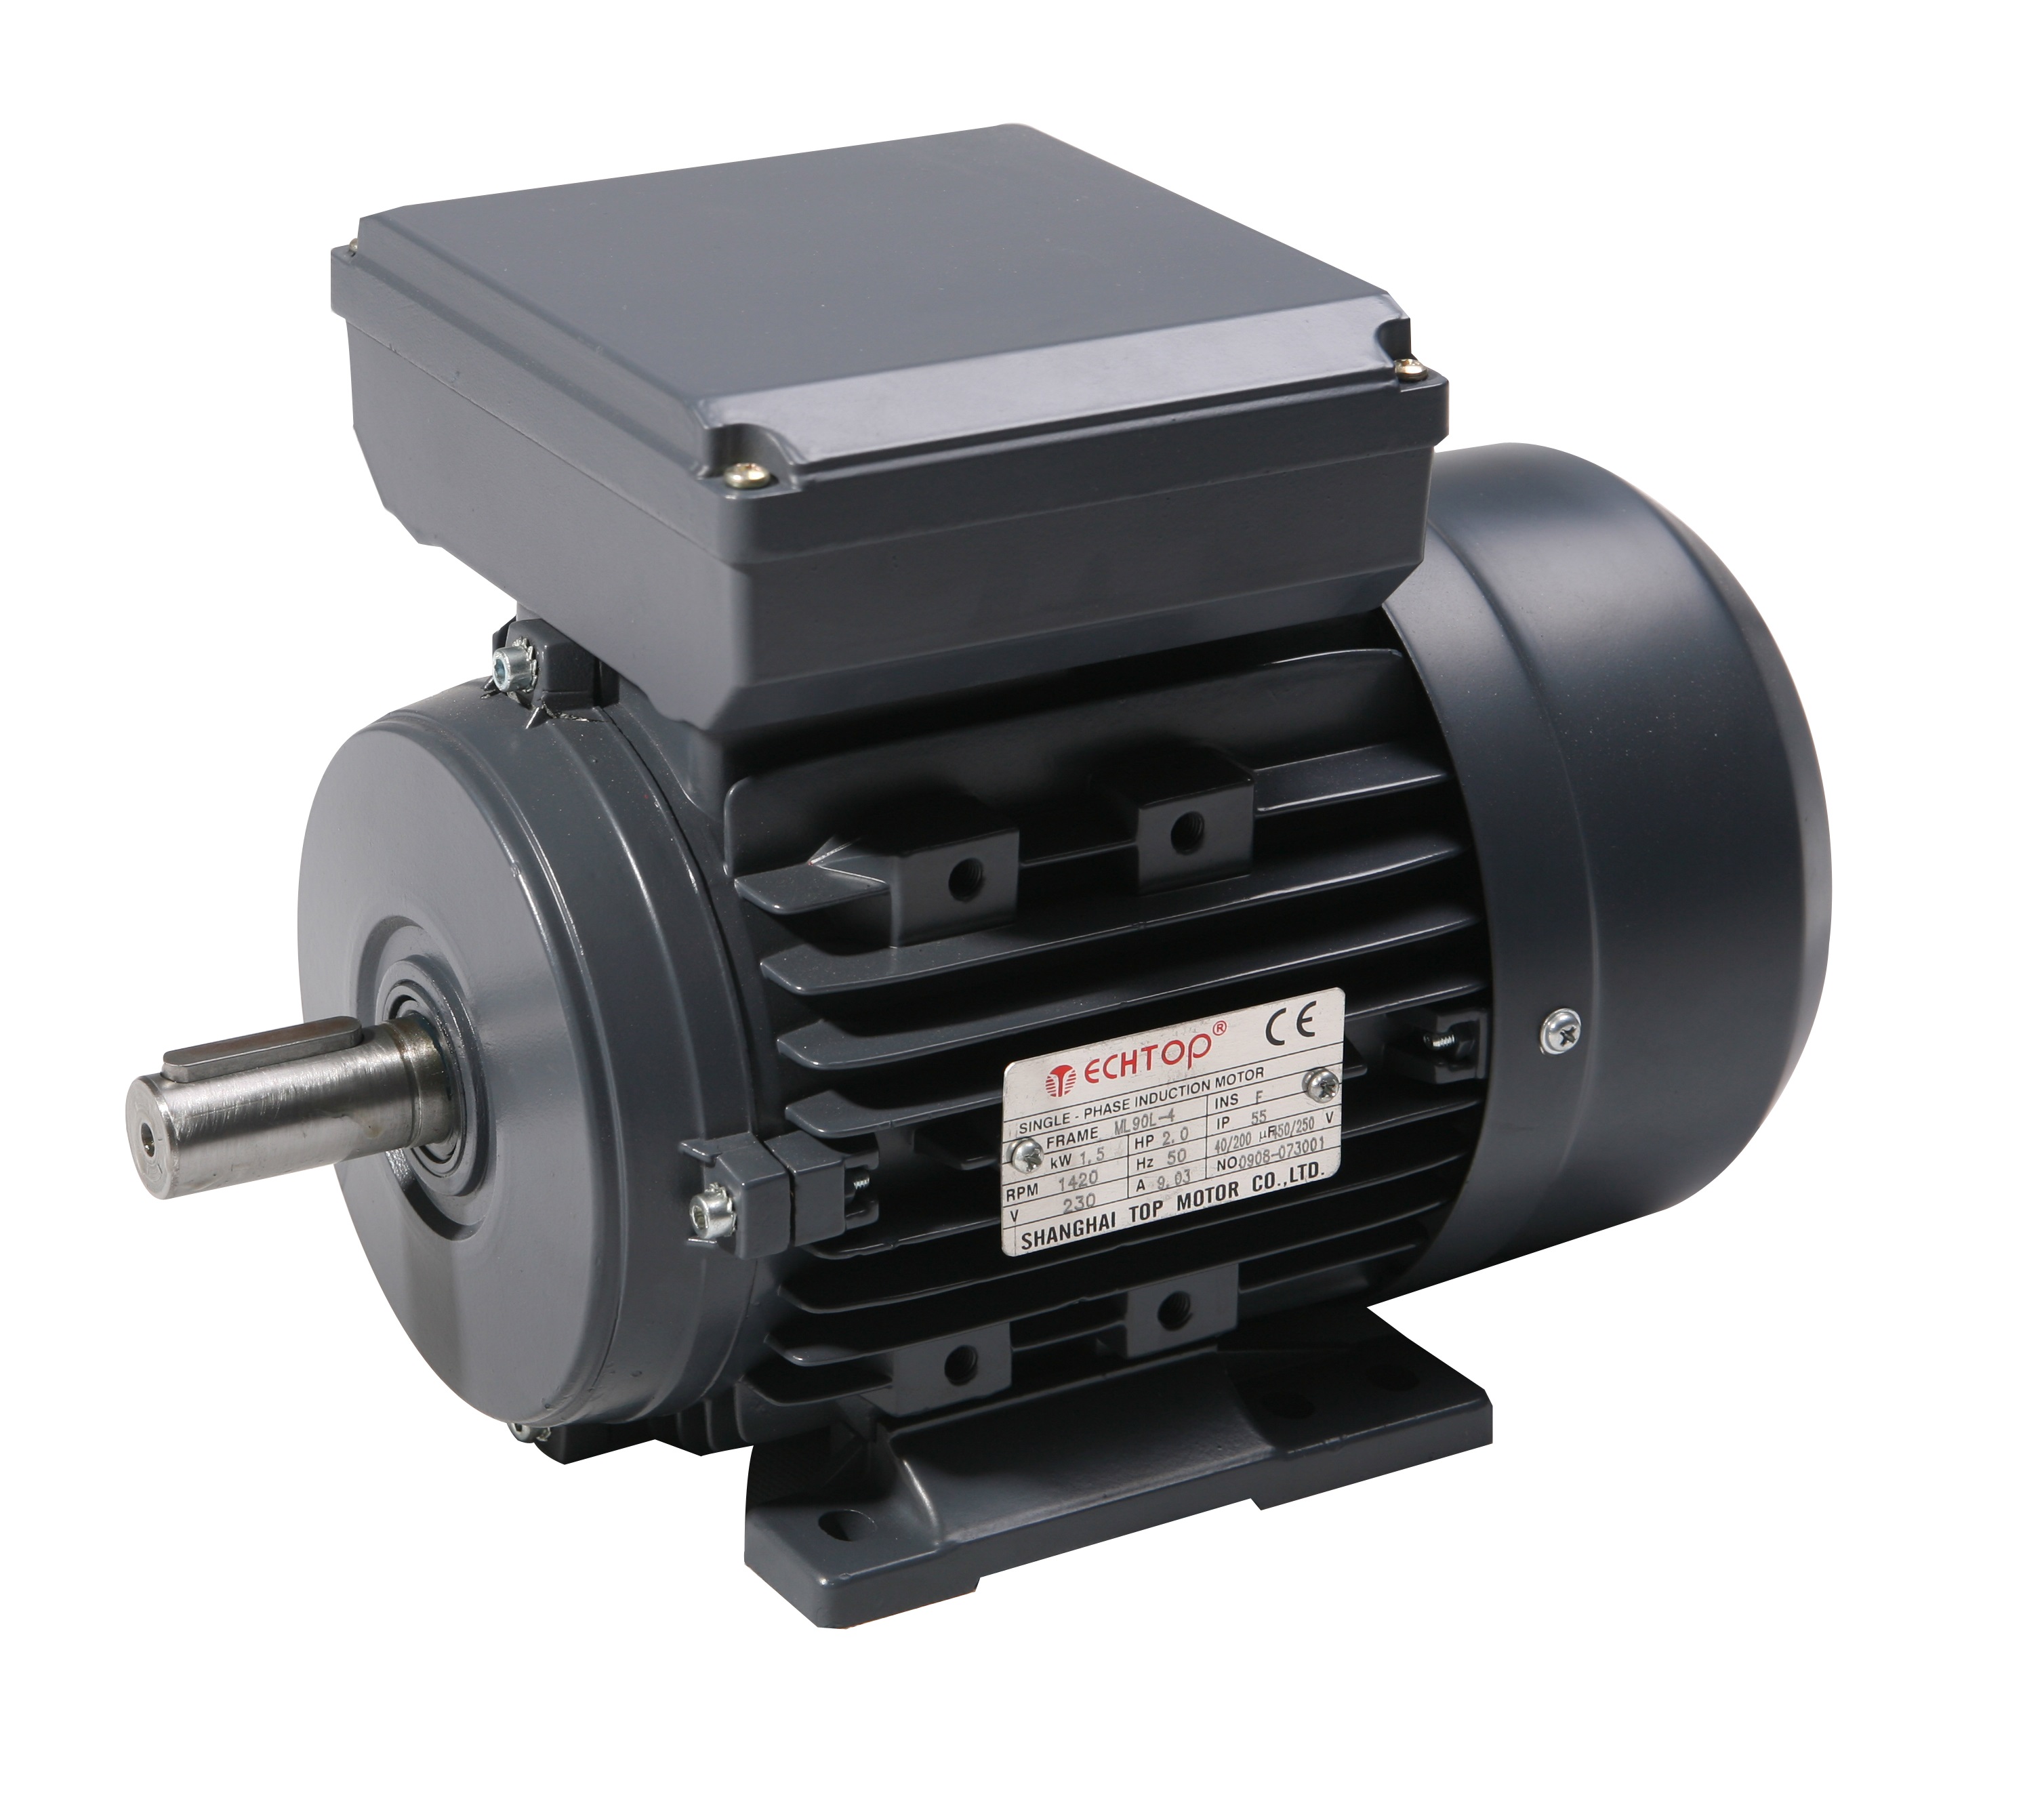 Single Phase 110v Electric Motor, 0.25Kw 4 pole 1500rpm with foot mount